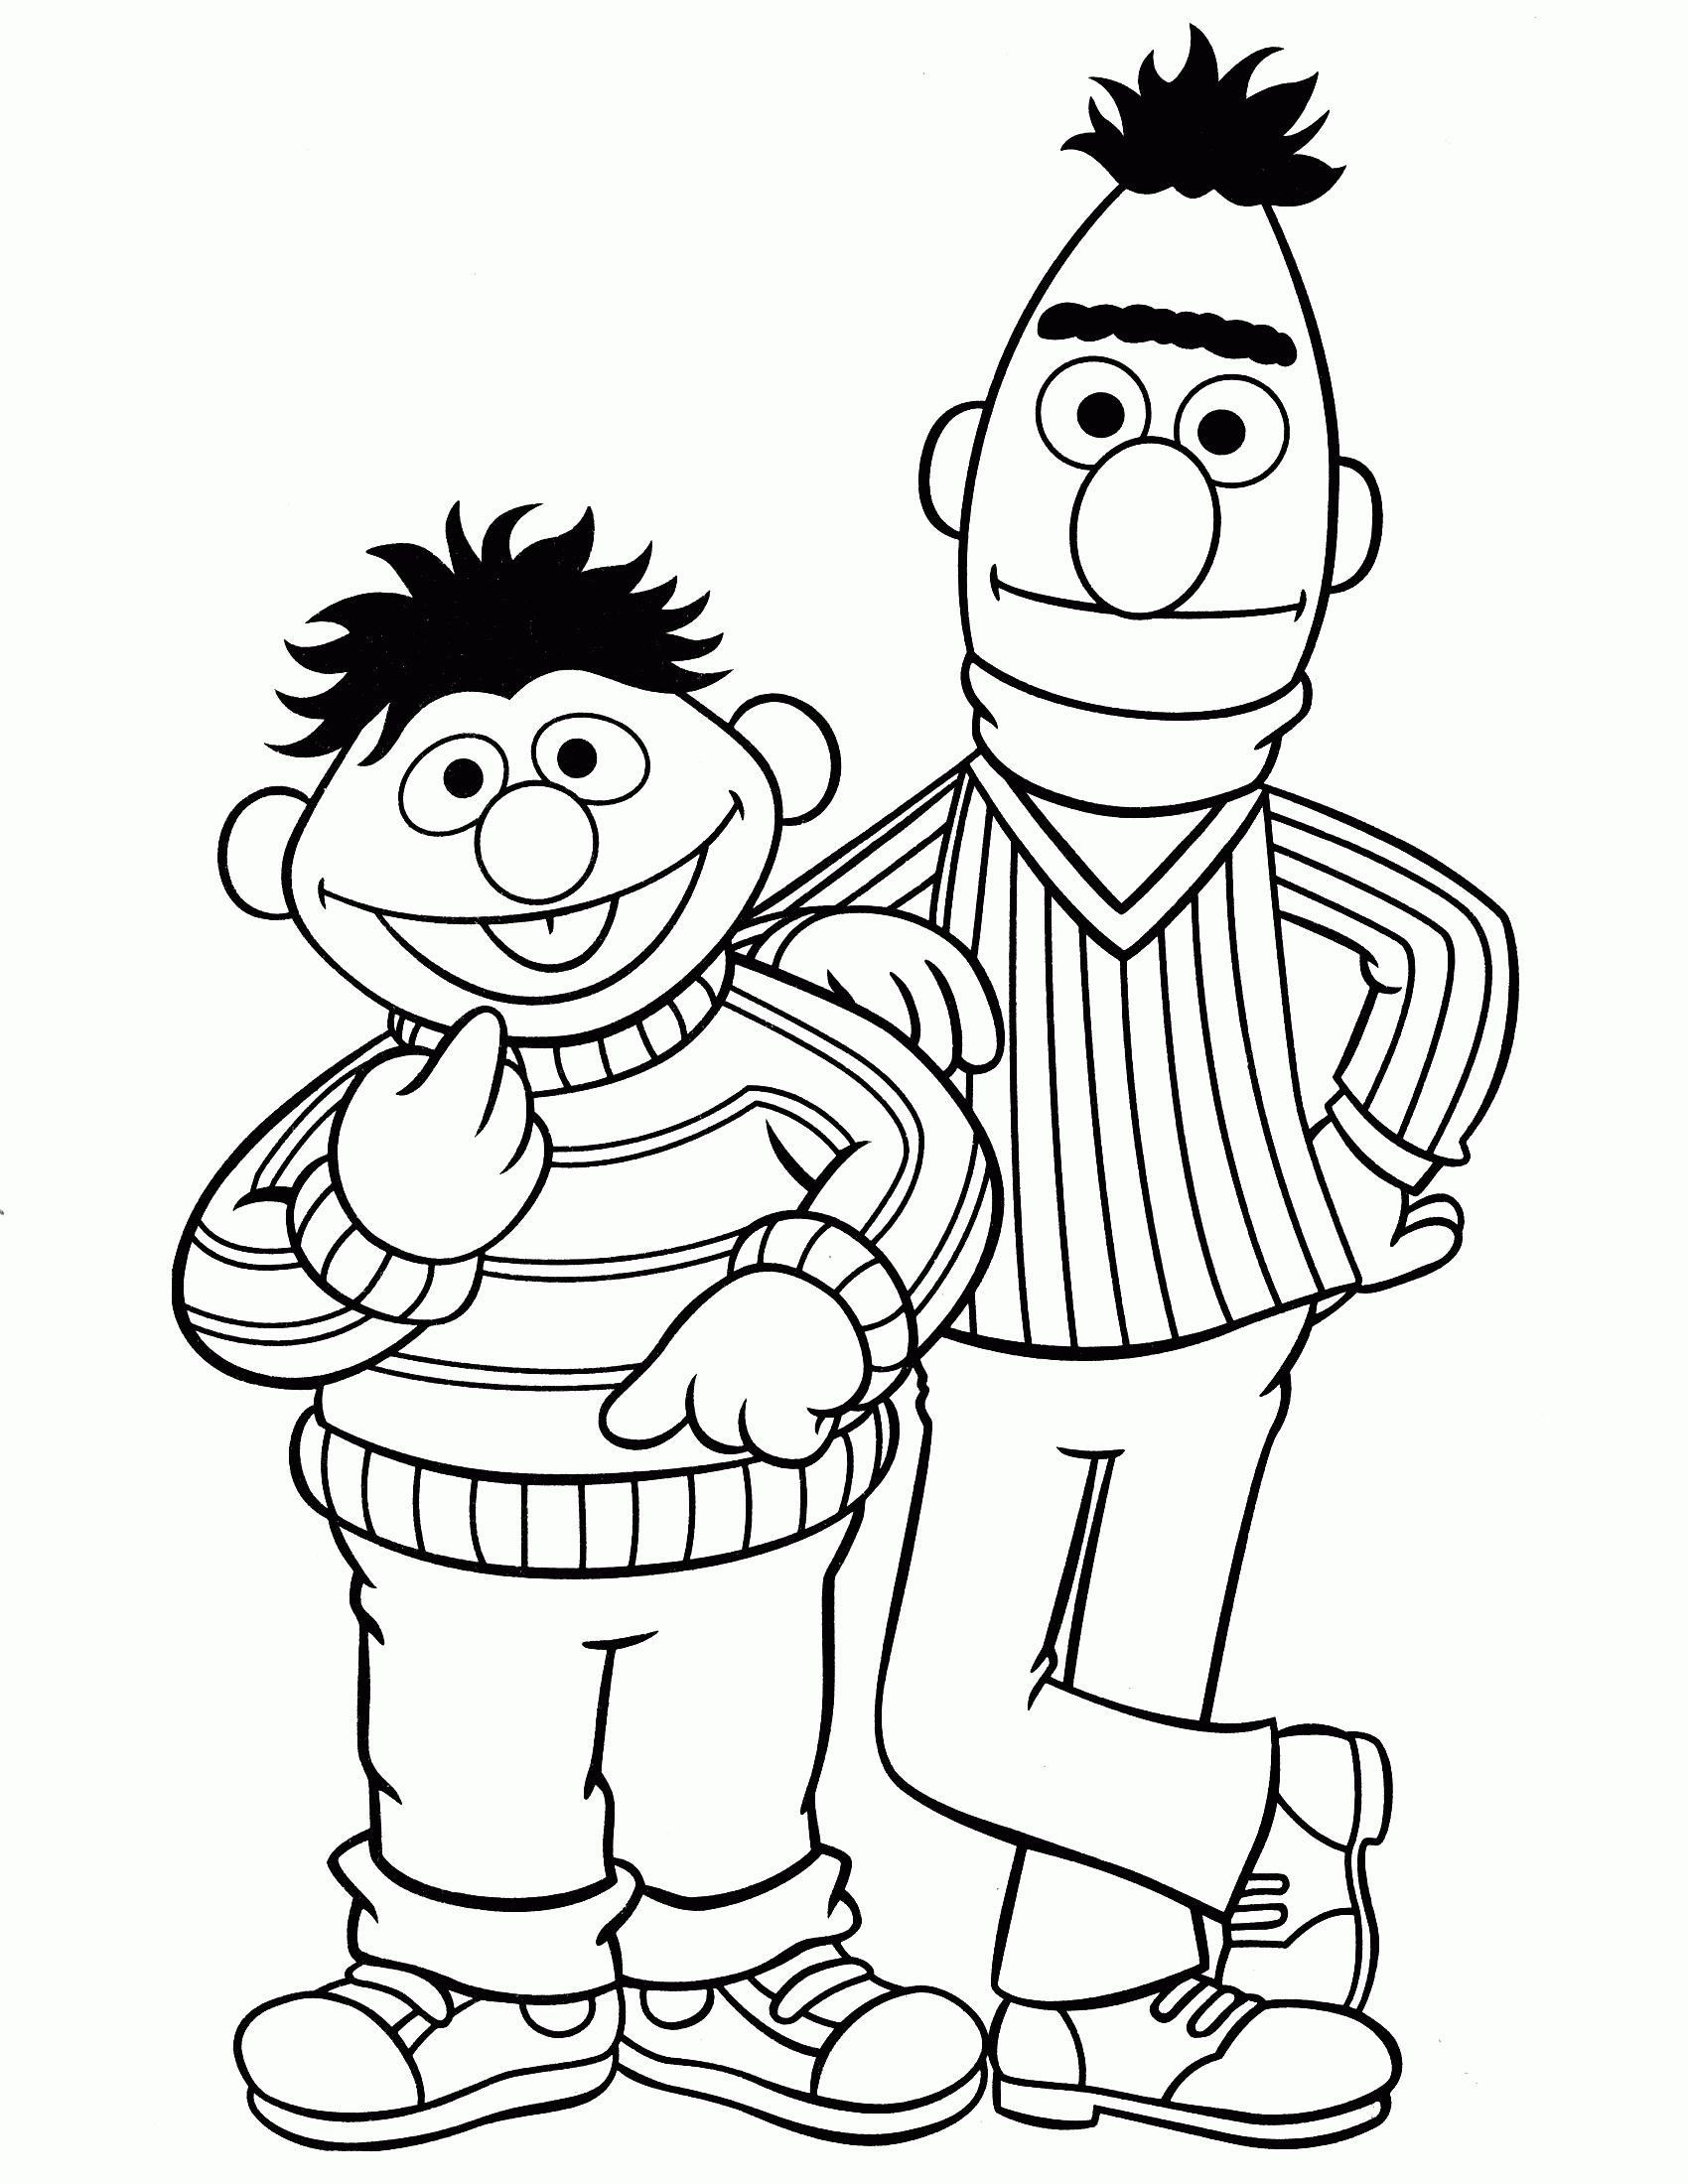 Sesame Street Characters Coloring Pages Elmo - Voteforverde - Free Printable Coloring Pages Sesame Street Characters